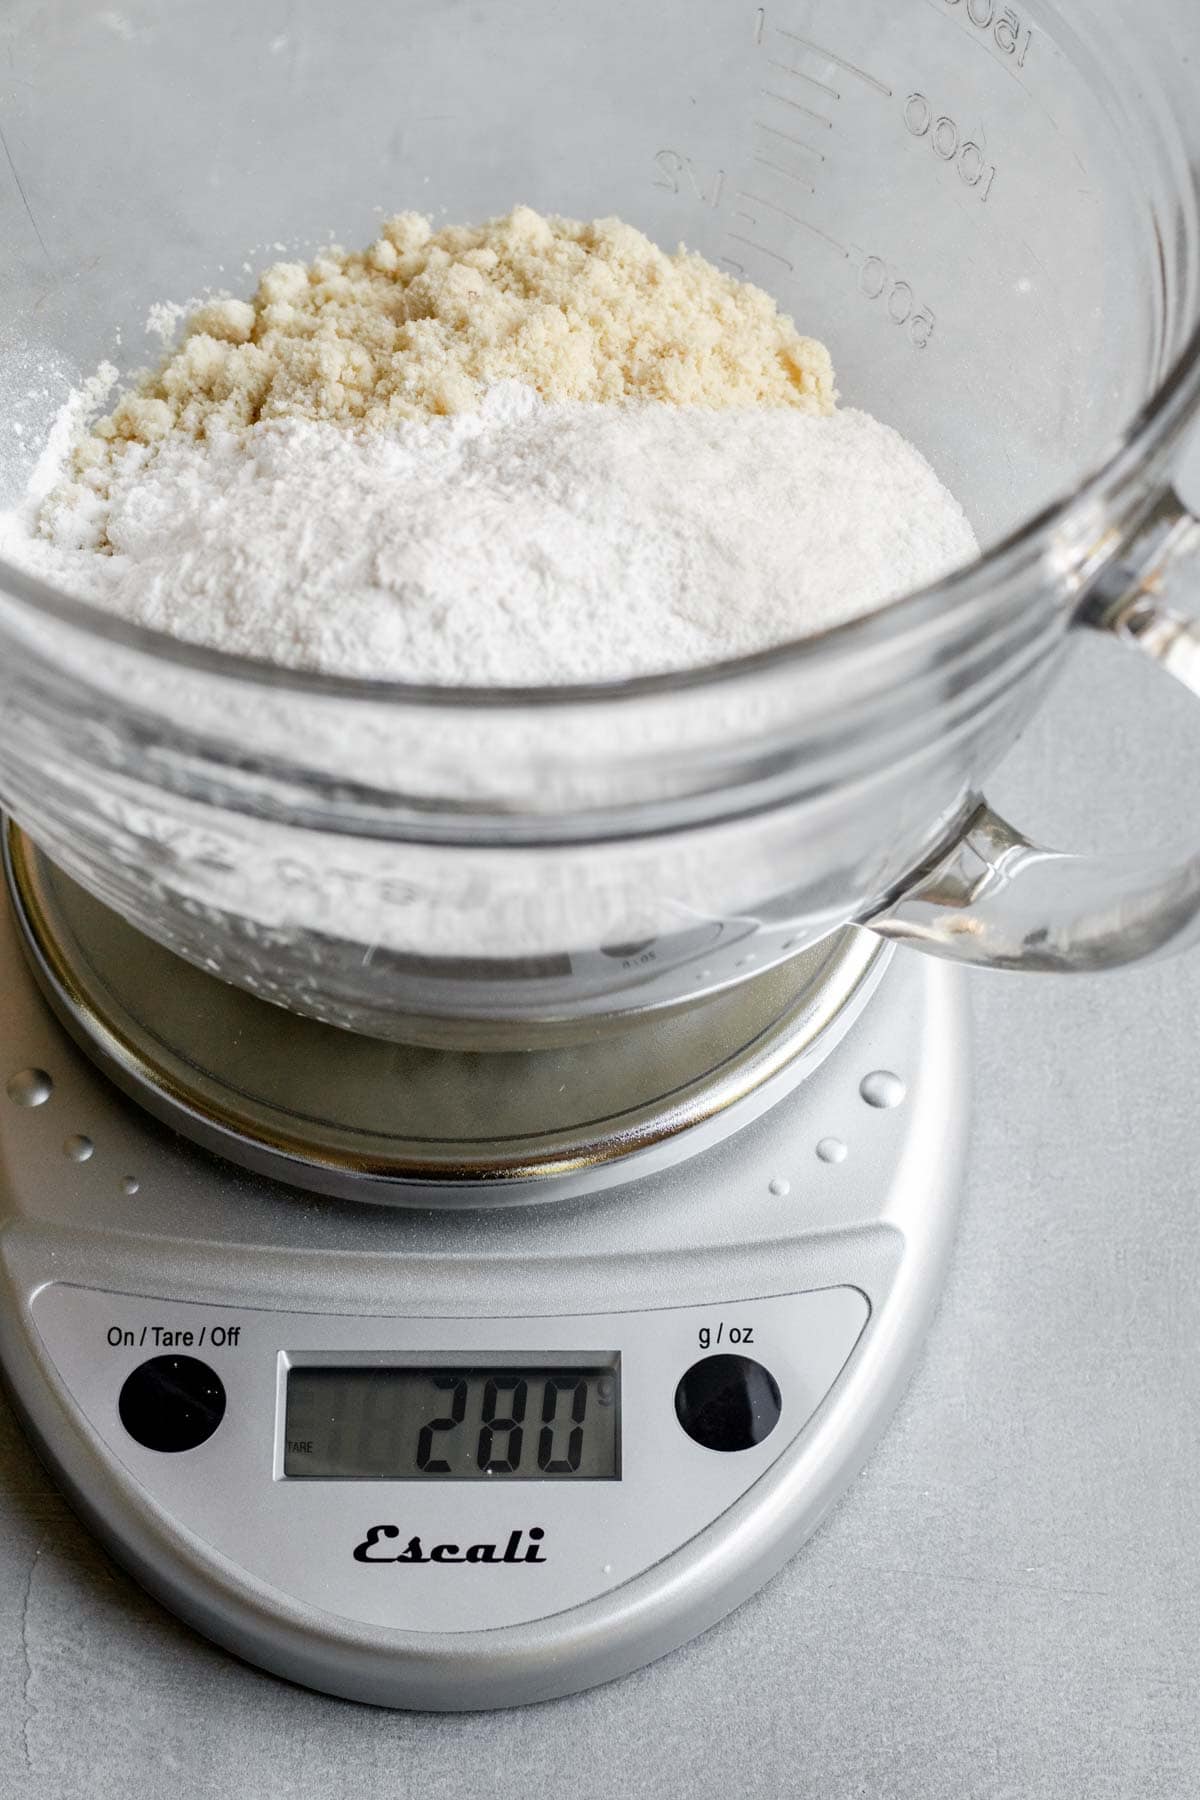 Using a kitchen scale to weigh dry ingredients for pie crust.